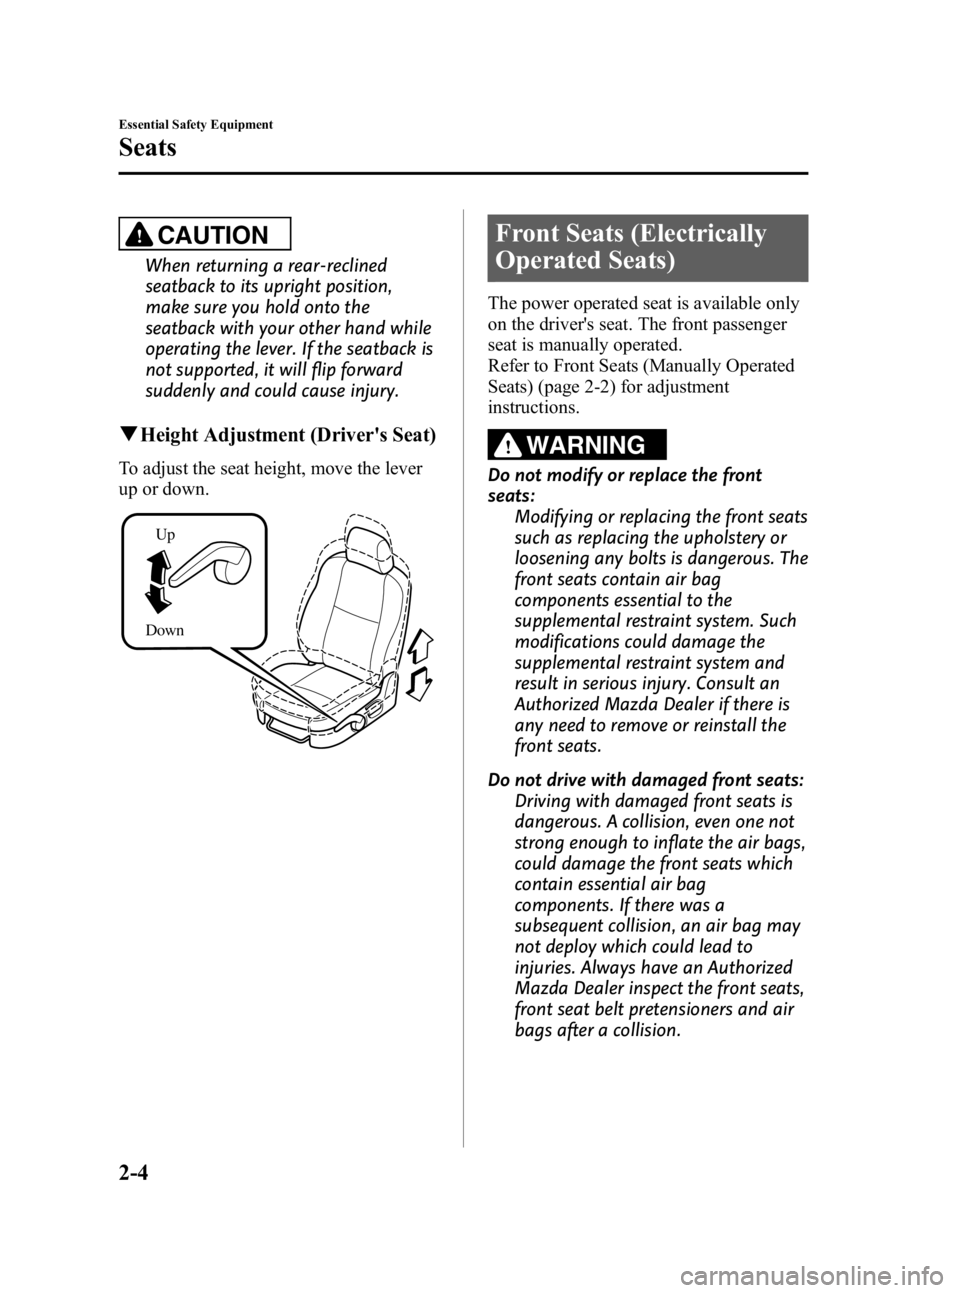 MAZDA MODEL 3 5-DOOR 2010 User Guide Black plate (18,1)
CAUTION
When returning a rear-reclined
seatback to its upright position,
make sure you hold onto the
seatback with your other hand while
operating the lever. If the seatback is
not 